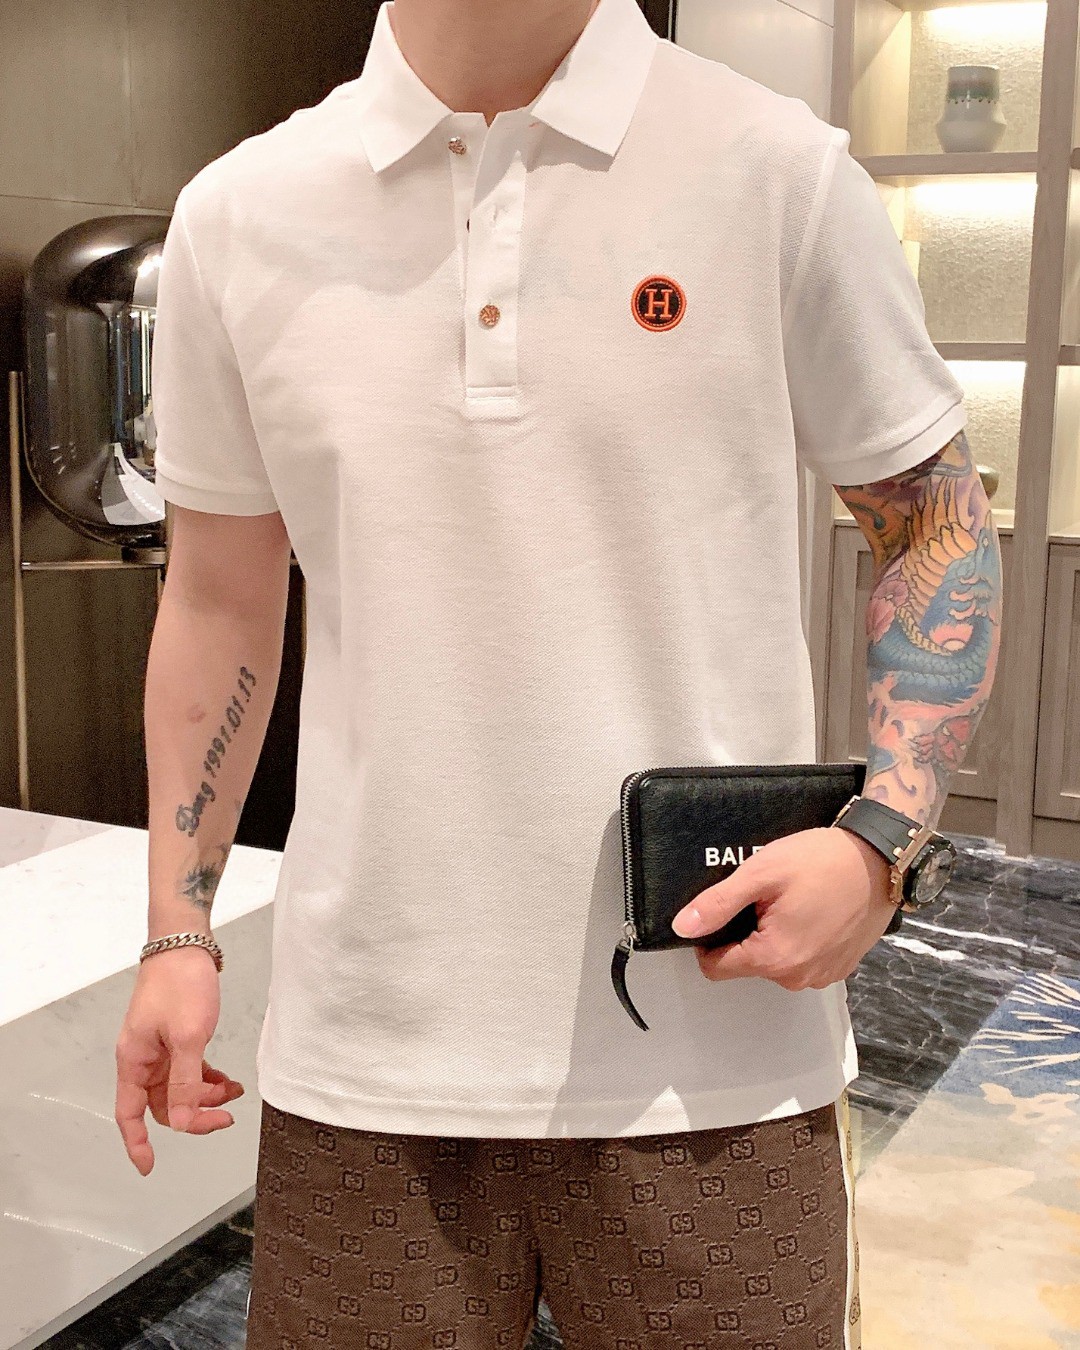 Hermes Clothing Polo T-Shirt White Men Cotton Spring/Summer Collection Fashion Short Sleeve